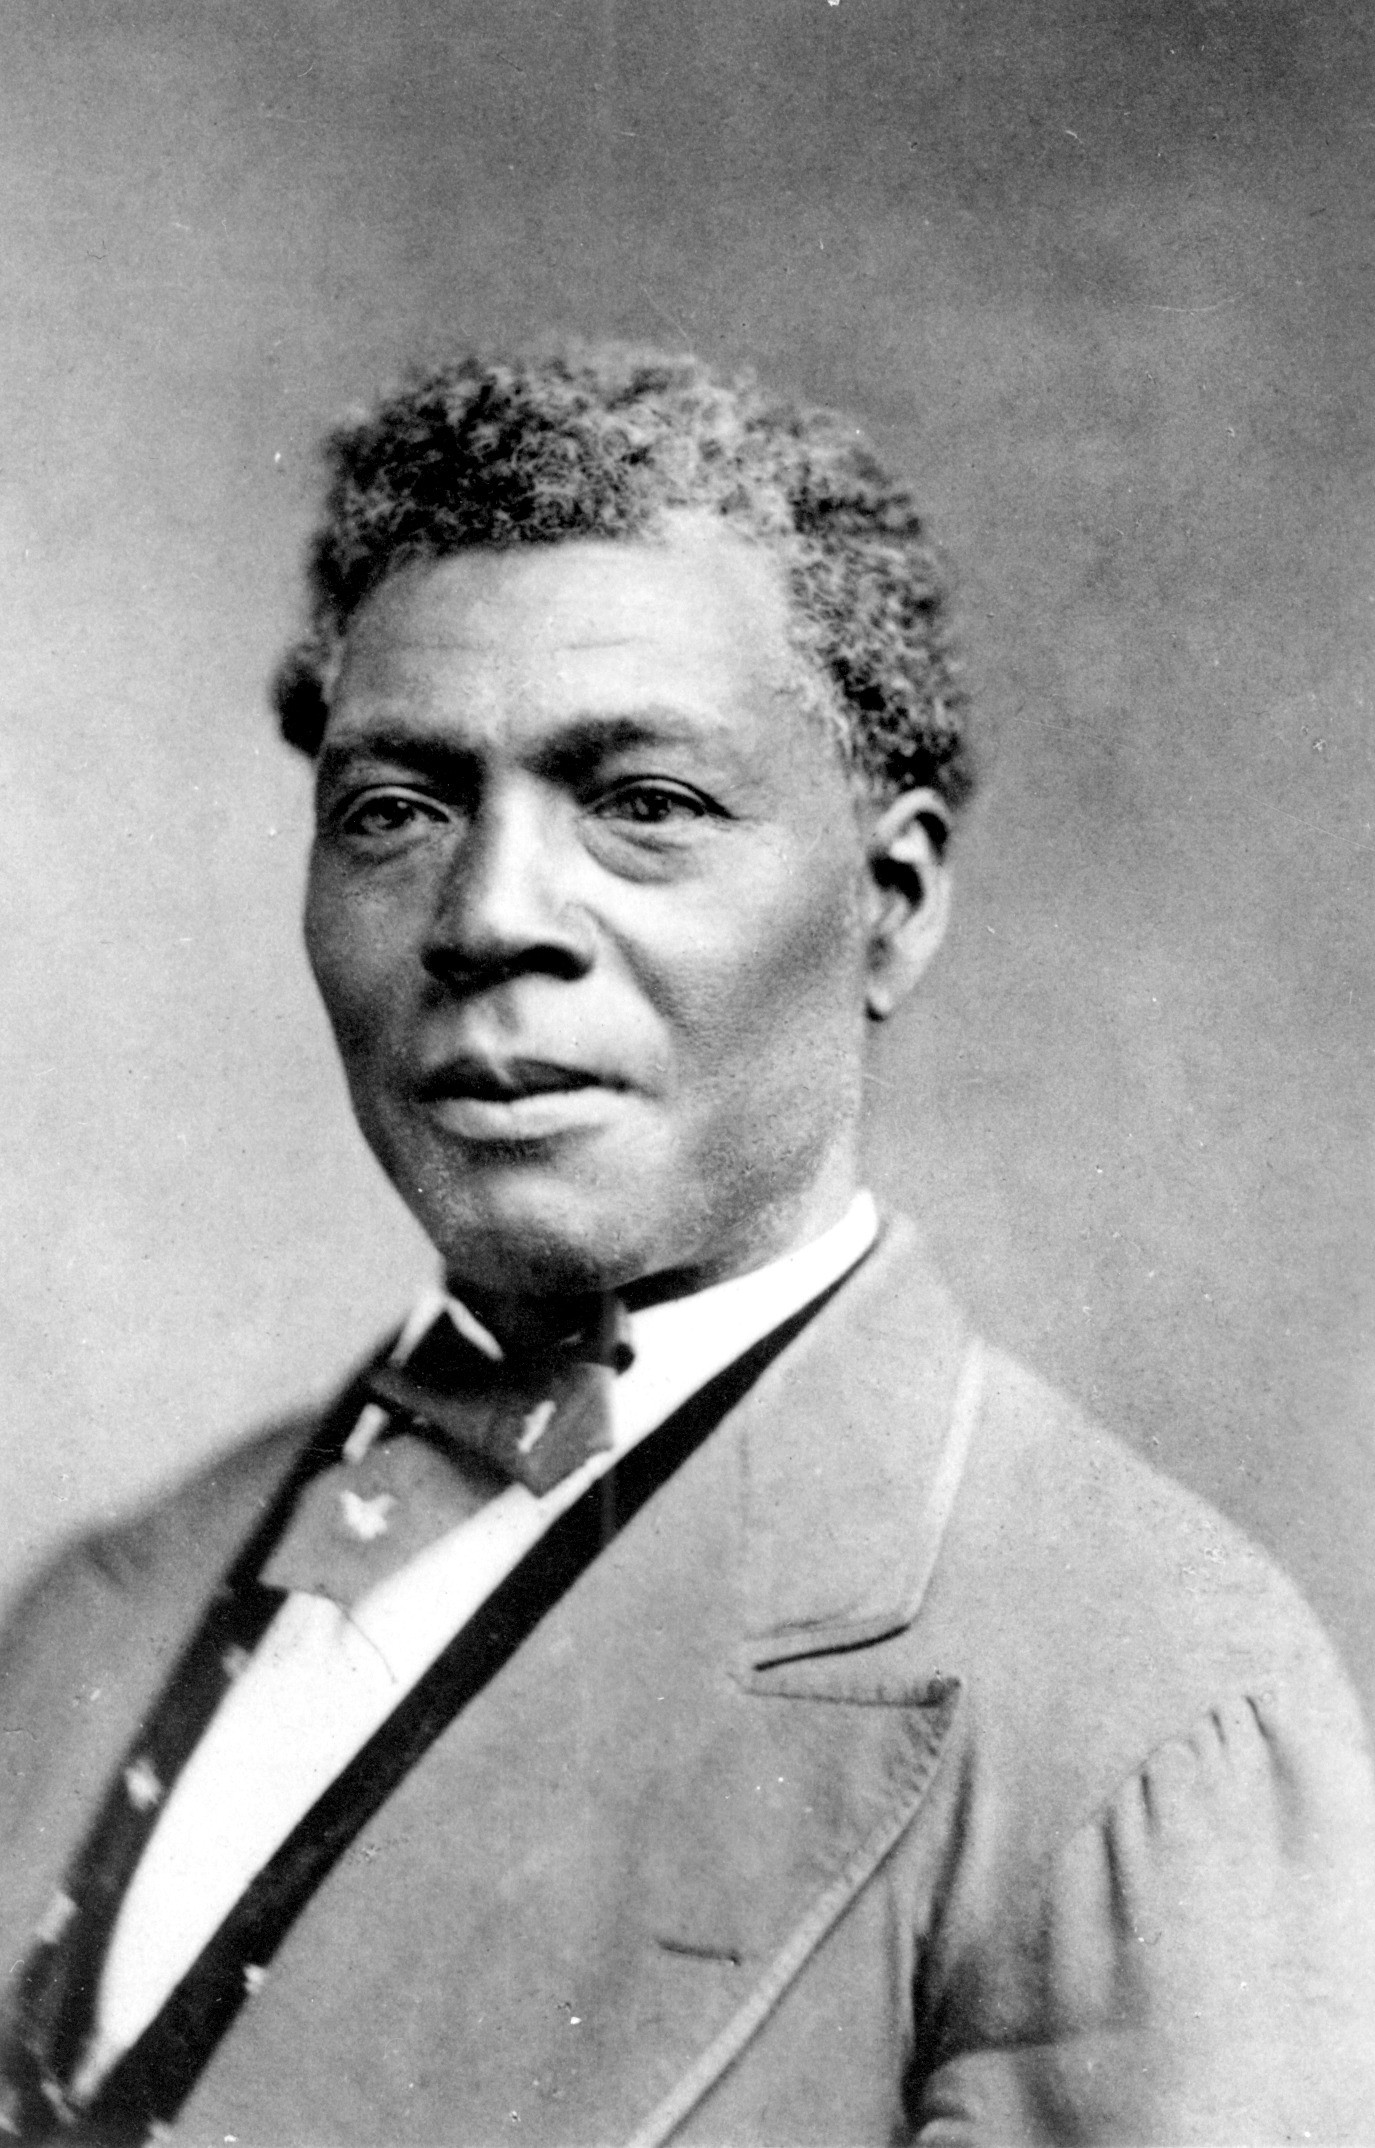 Photograph portrait of Archer Alexander, former slave. Photograph is a copy photo of an earlier work. Alexander is seen from chest up with body and head slightly angled toward the left. He is wearing a light colored jacket with pointed lapel, a dark vest, white shirt, and dark tie.